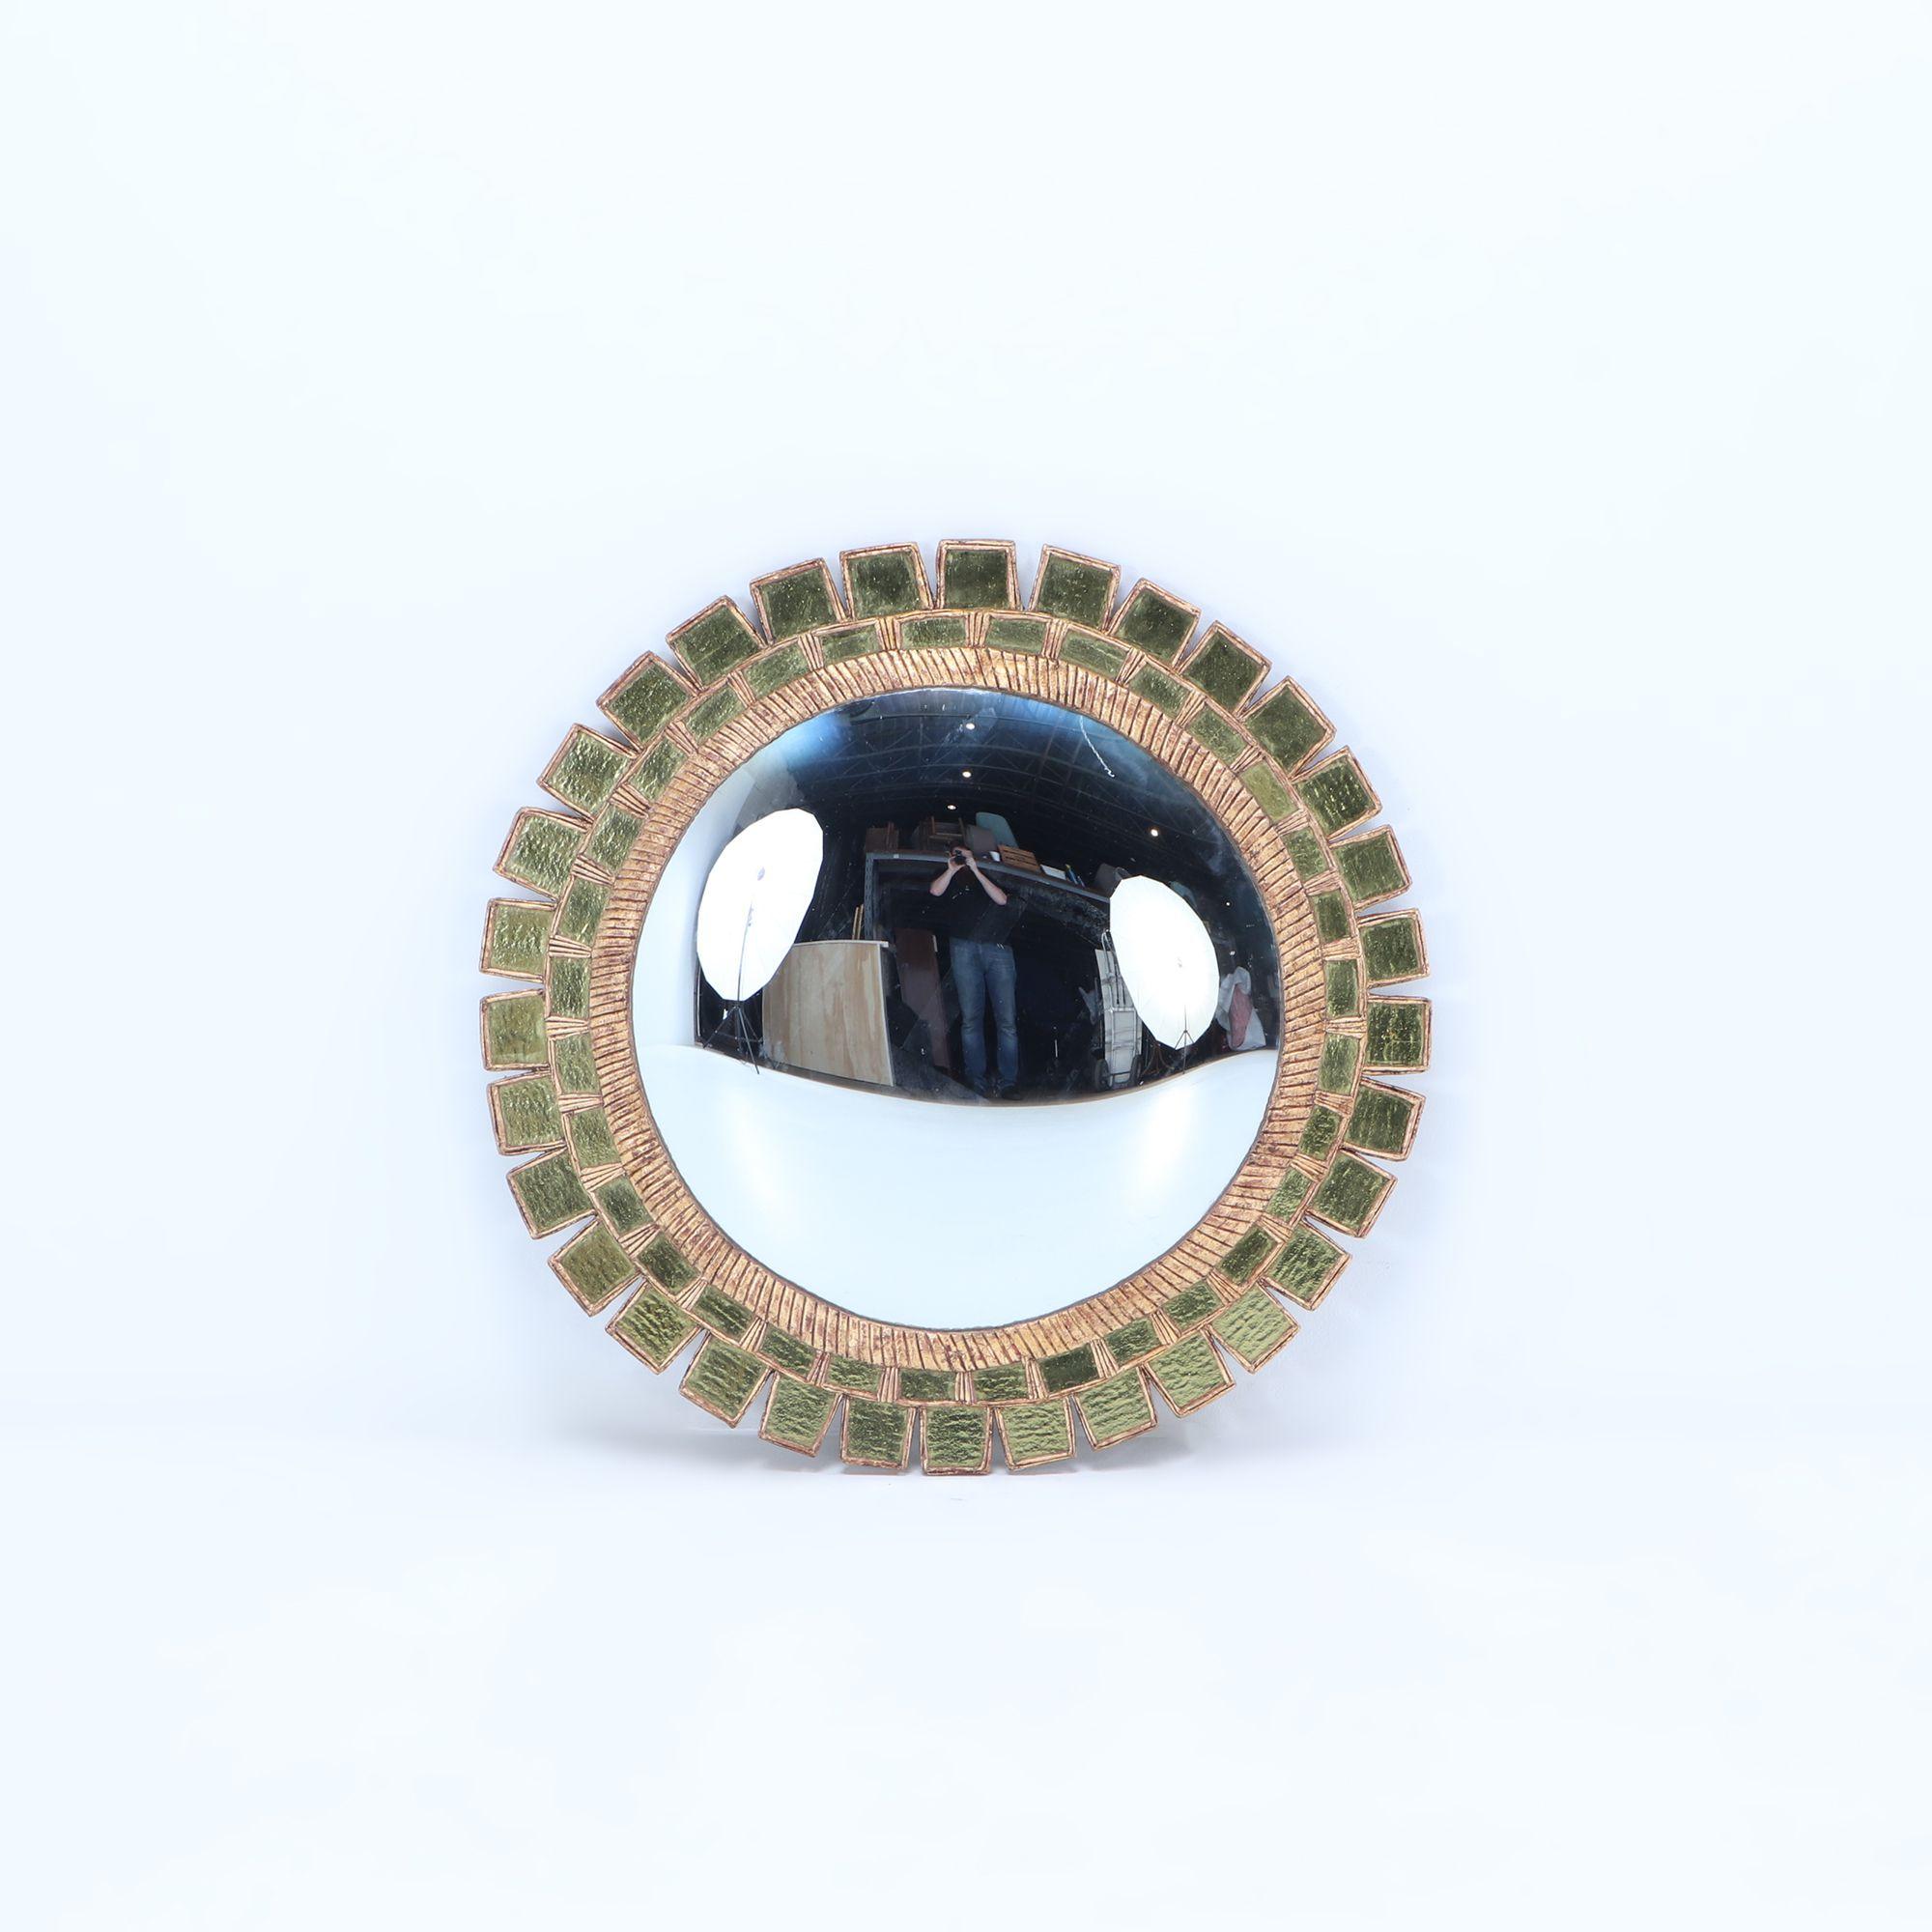 Contemporary glass and resin convex mirror in the manner of Line Vautrin having green textured glass and a geometric design. Possibly available in other sizes.